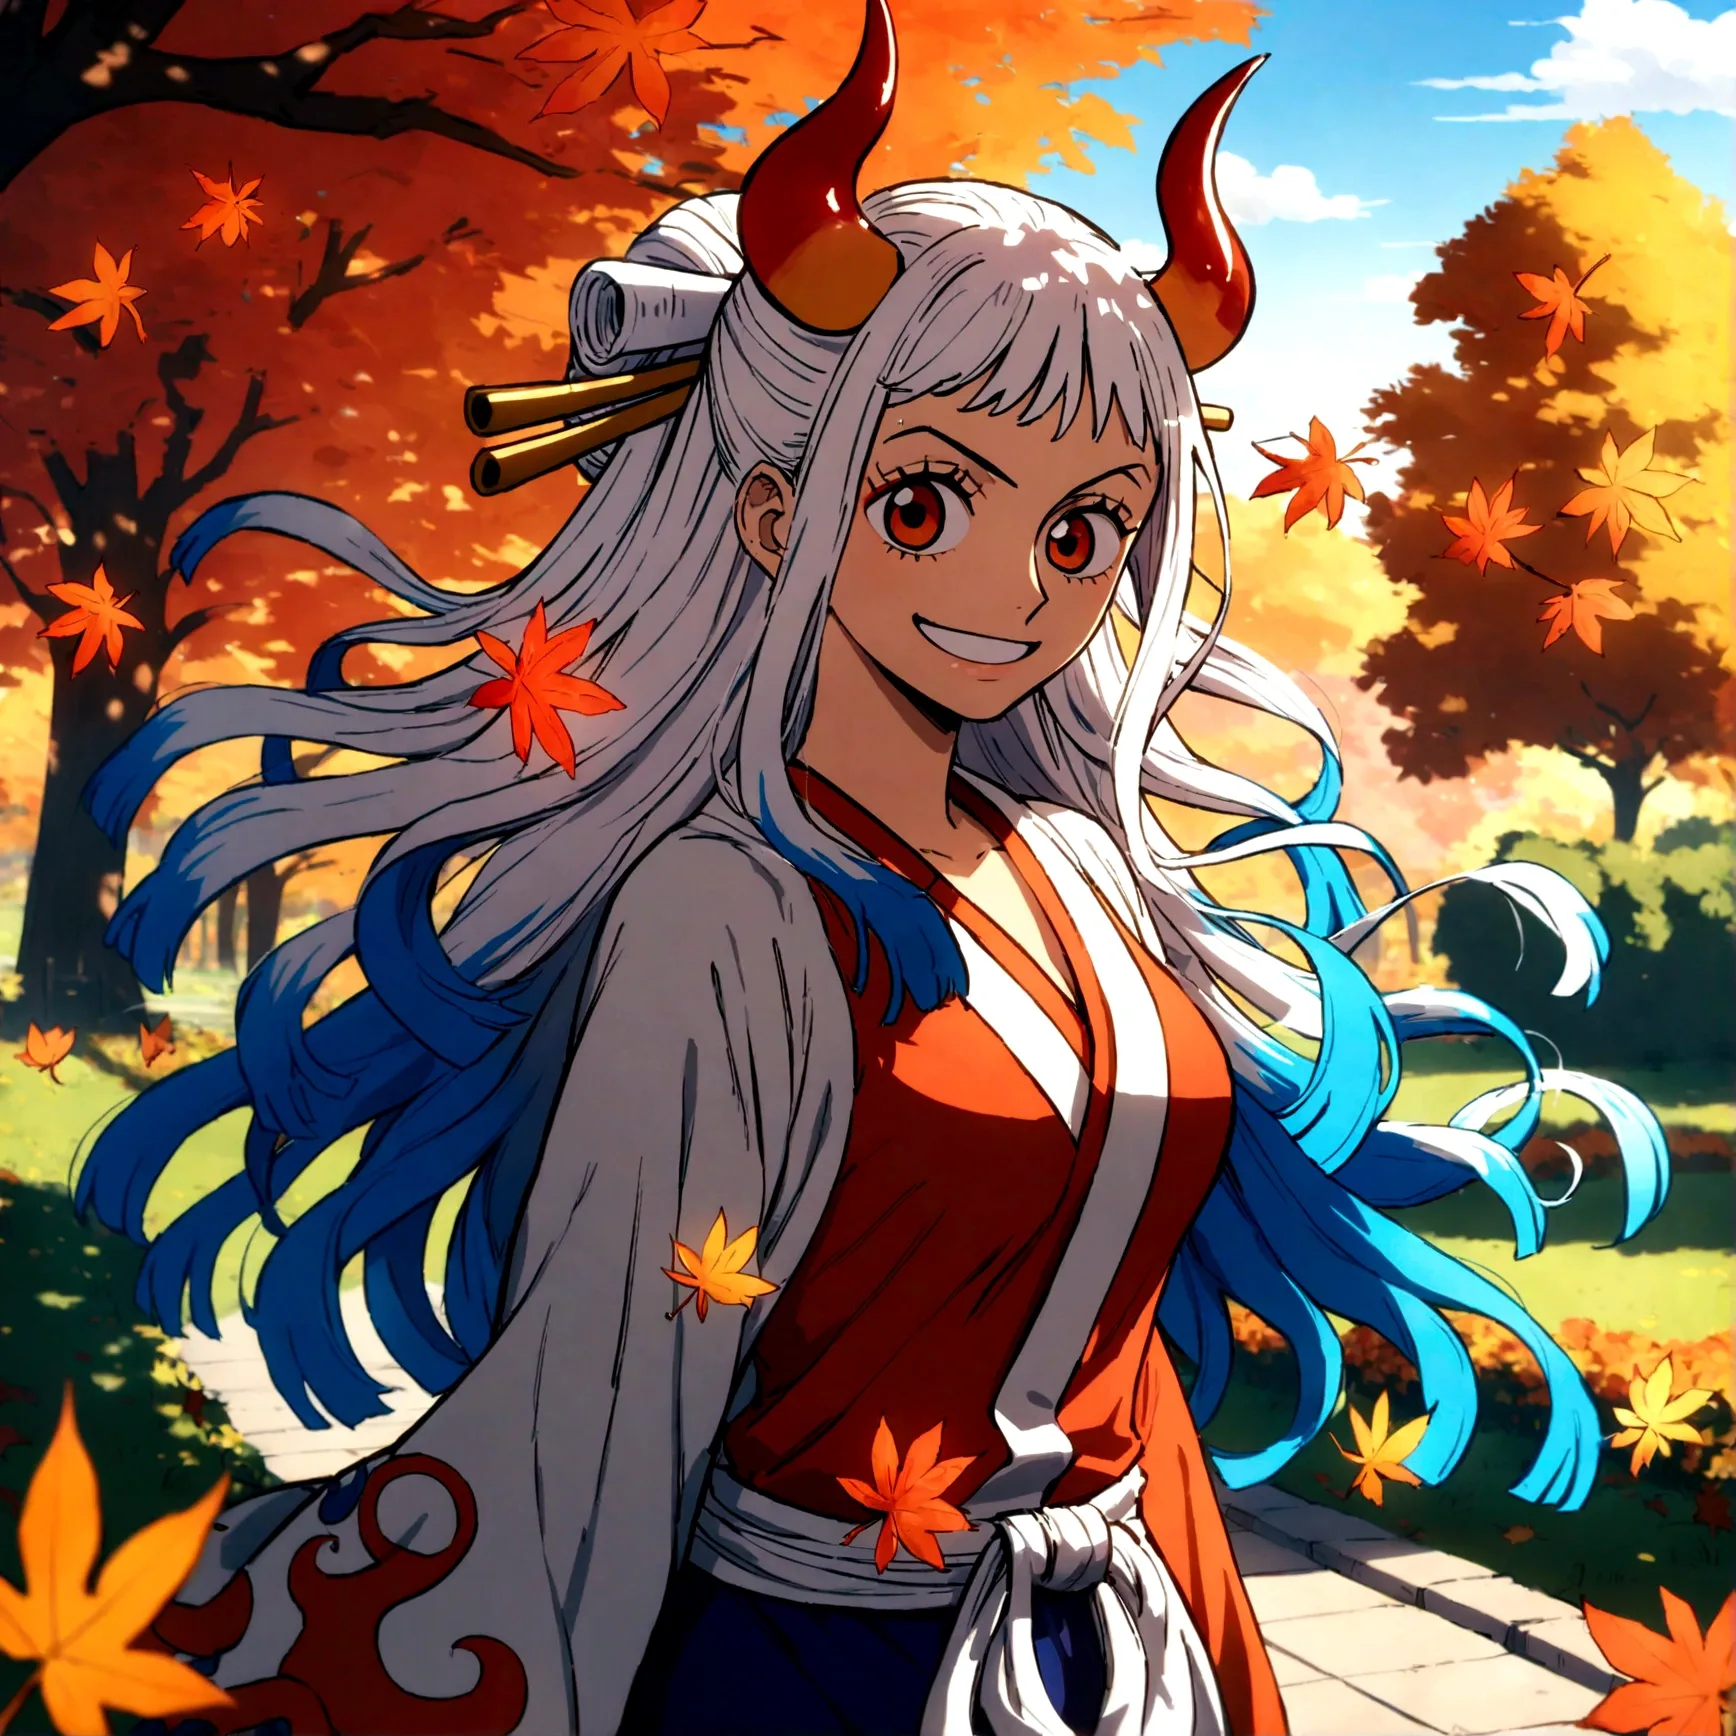 (yamato of one piece),smile,spotlight on face,long windy hair,multicolored hair,oni,horn,by eiichiro oda,solo,anime,flower,autumn leaves,garden,happy,masterpiece